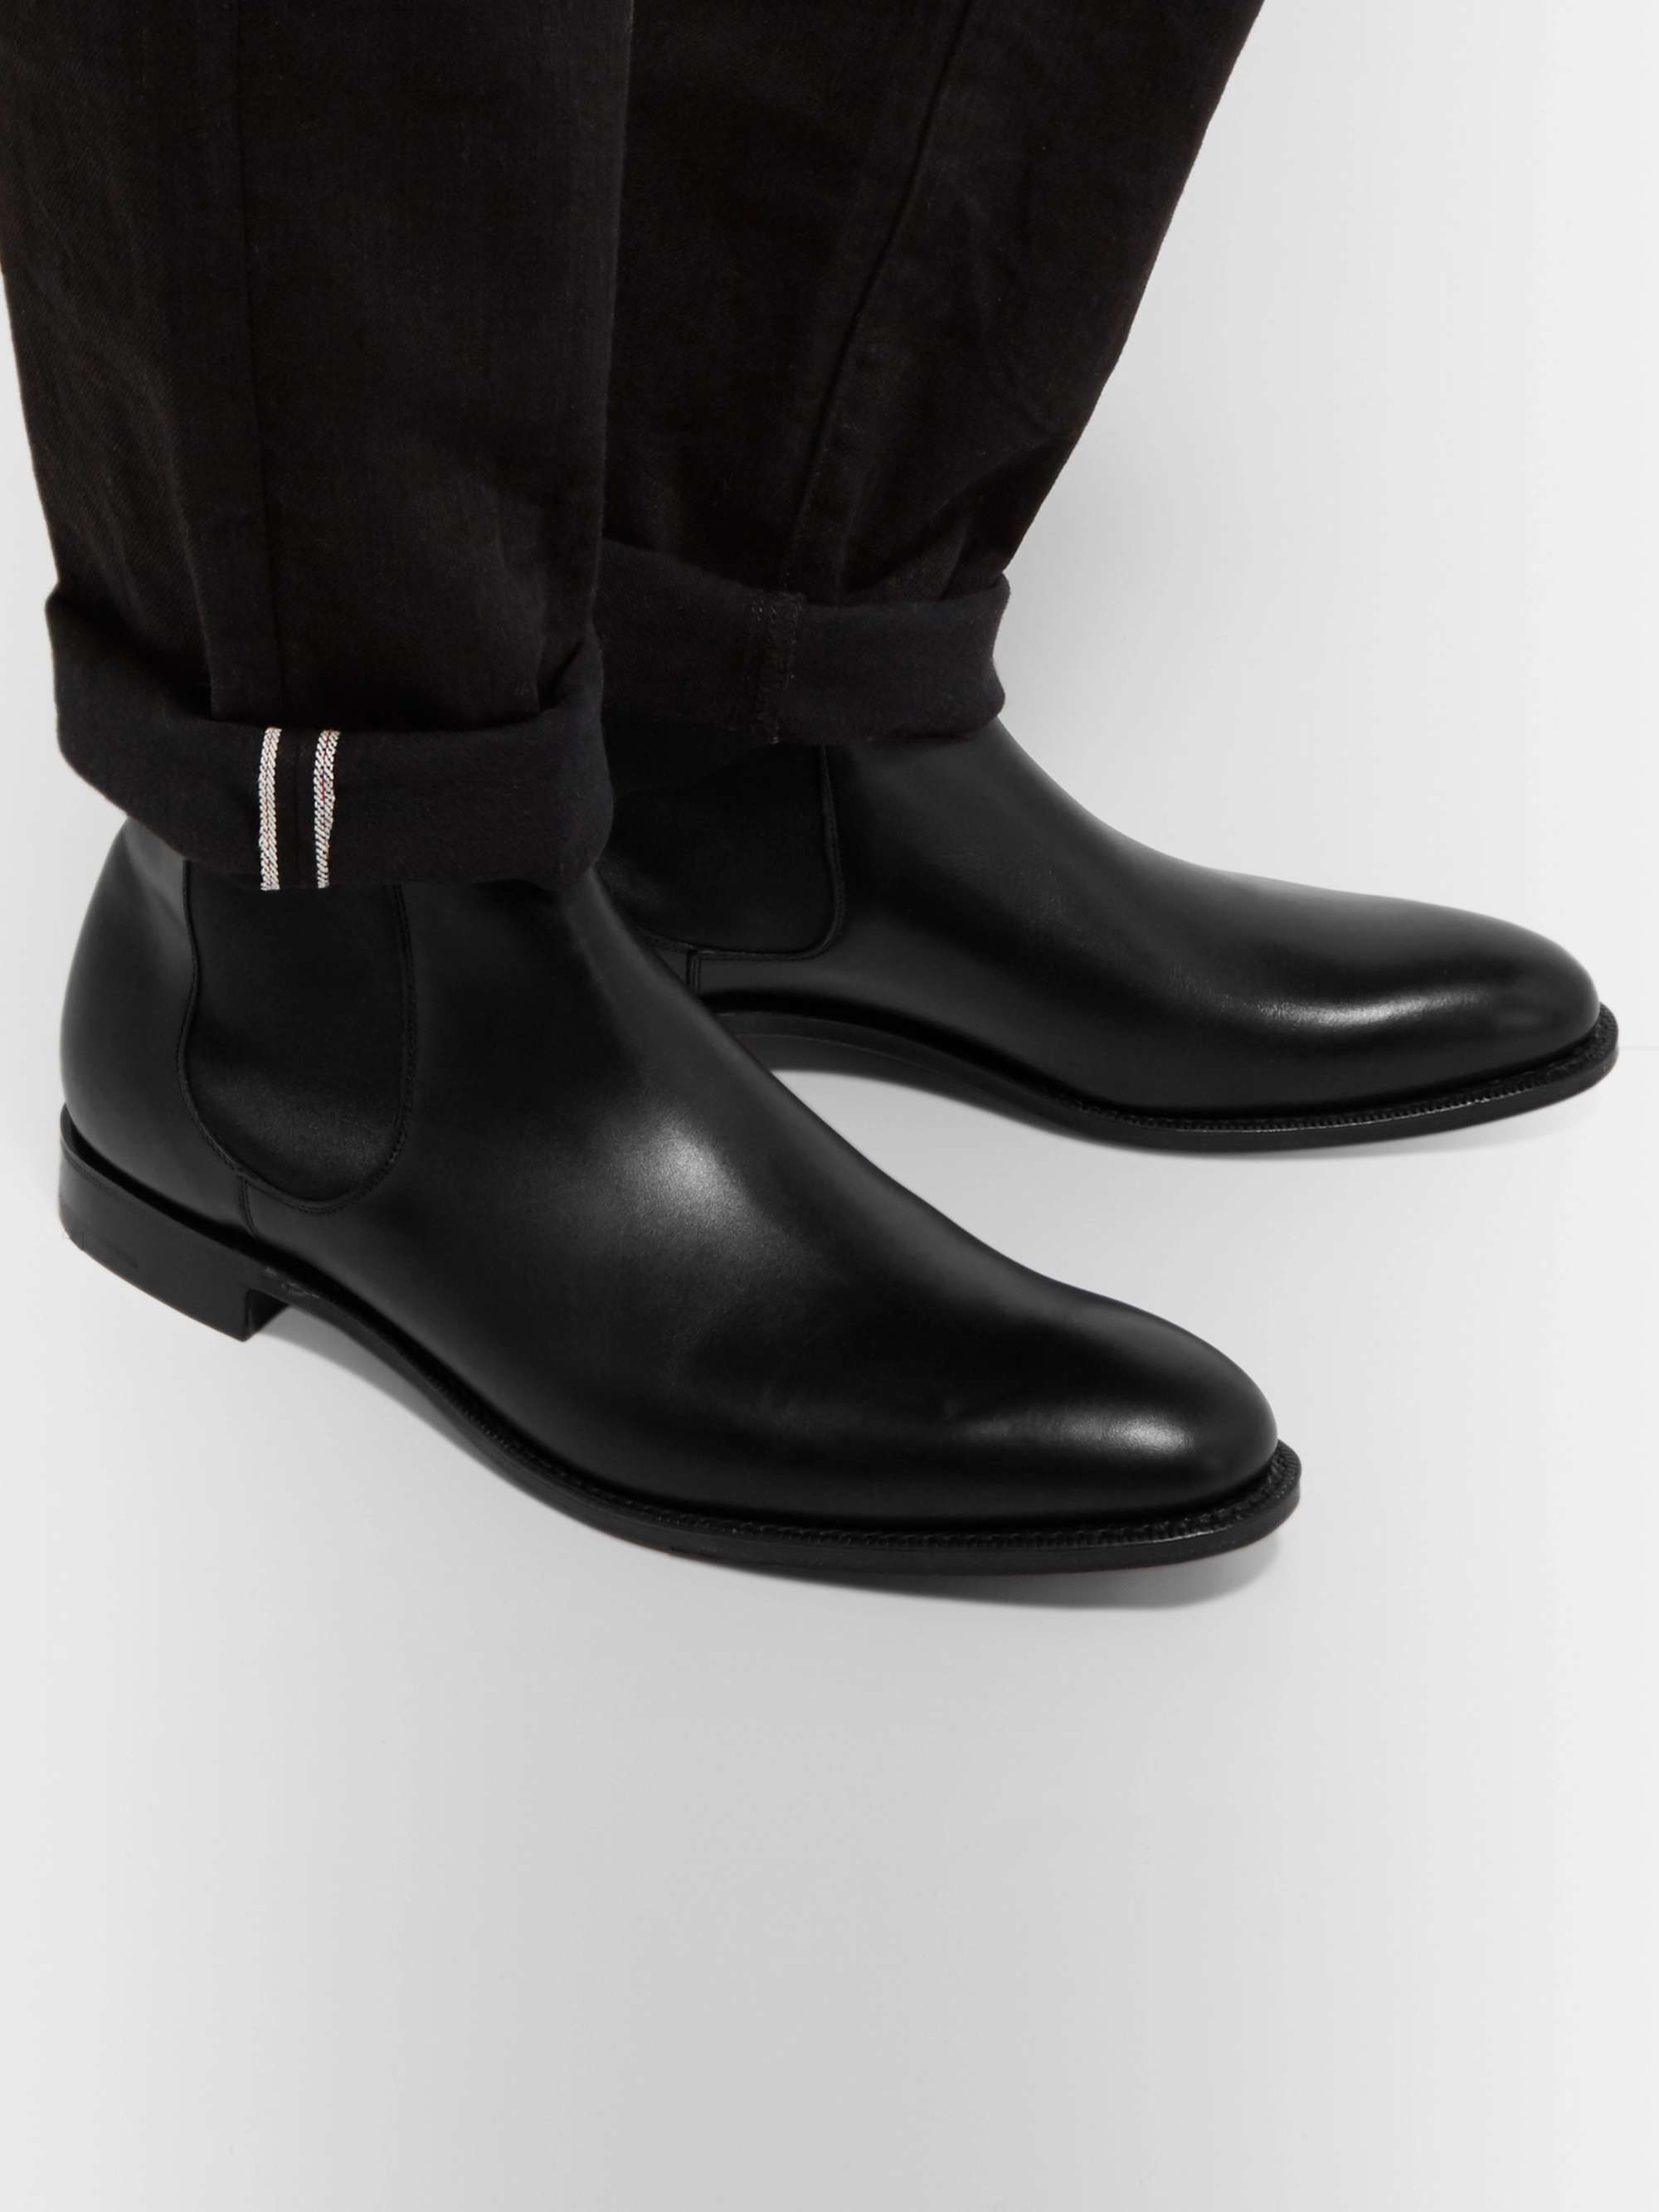 CHURCH'S Houston Leather Chelsea Boots